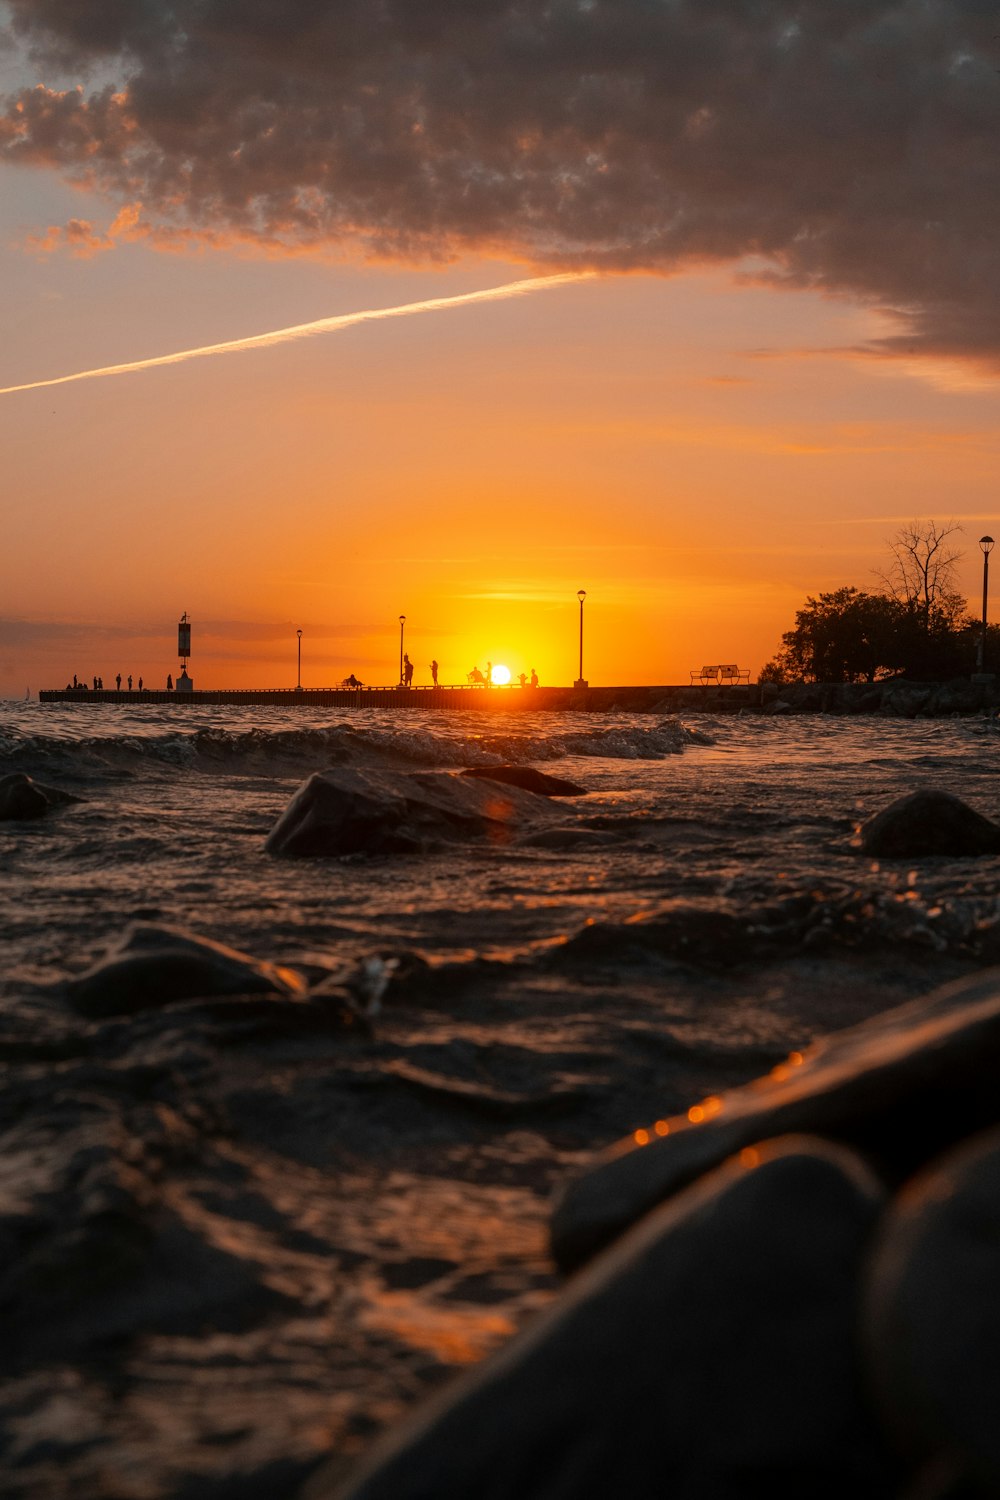 a sunset over a body of water with a light house in the distance